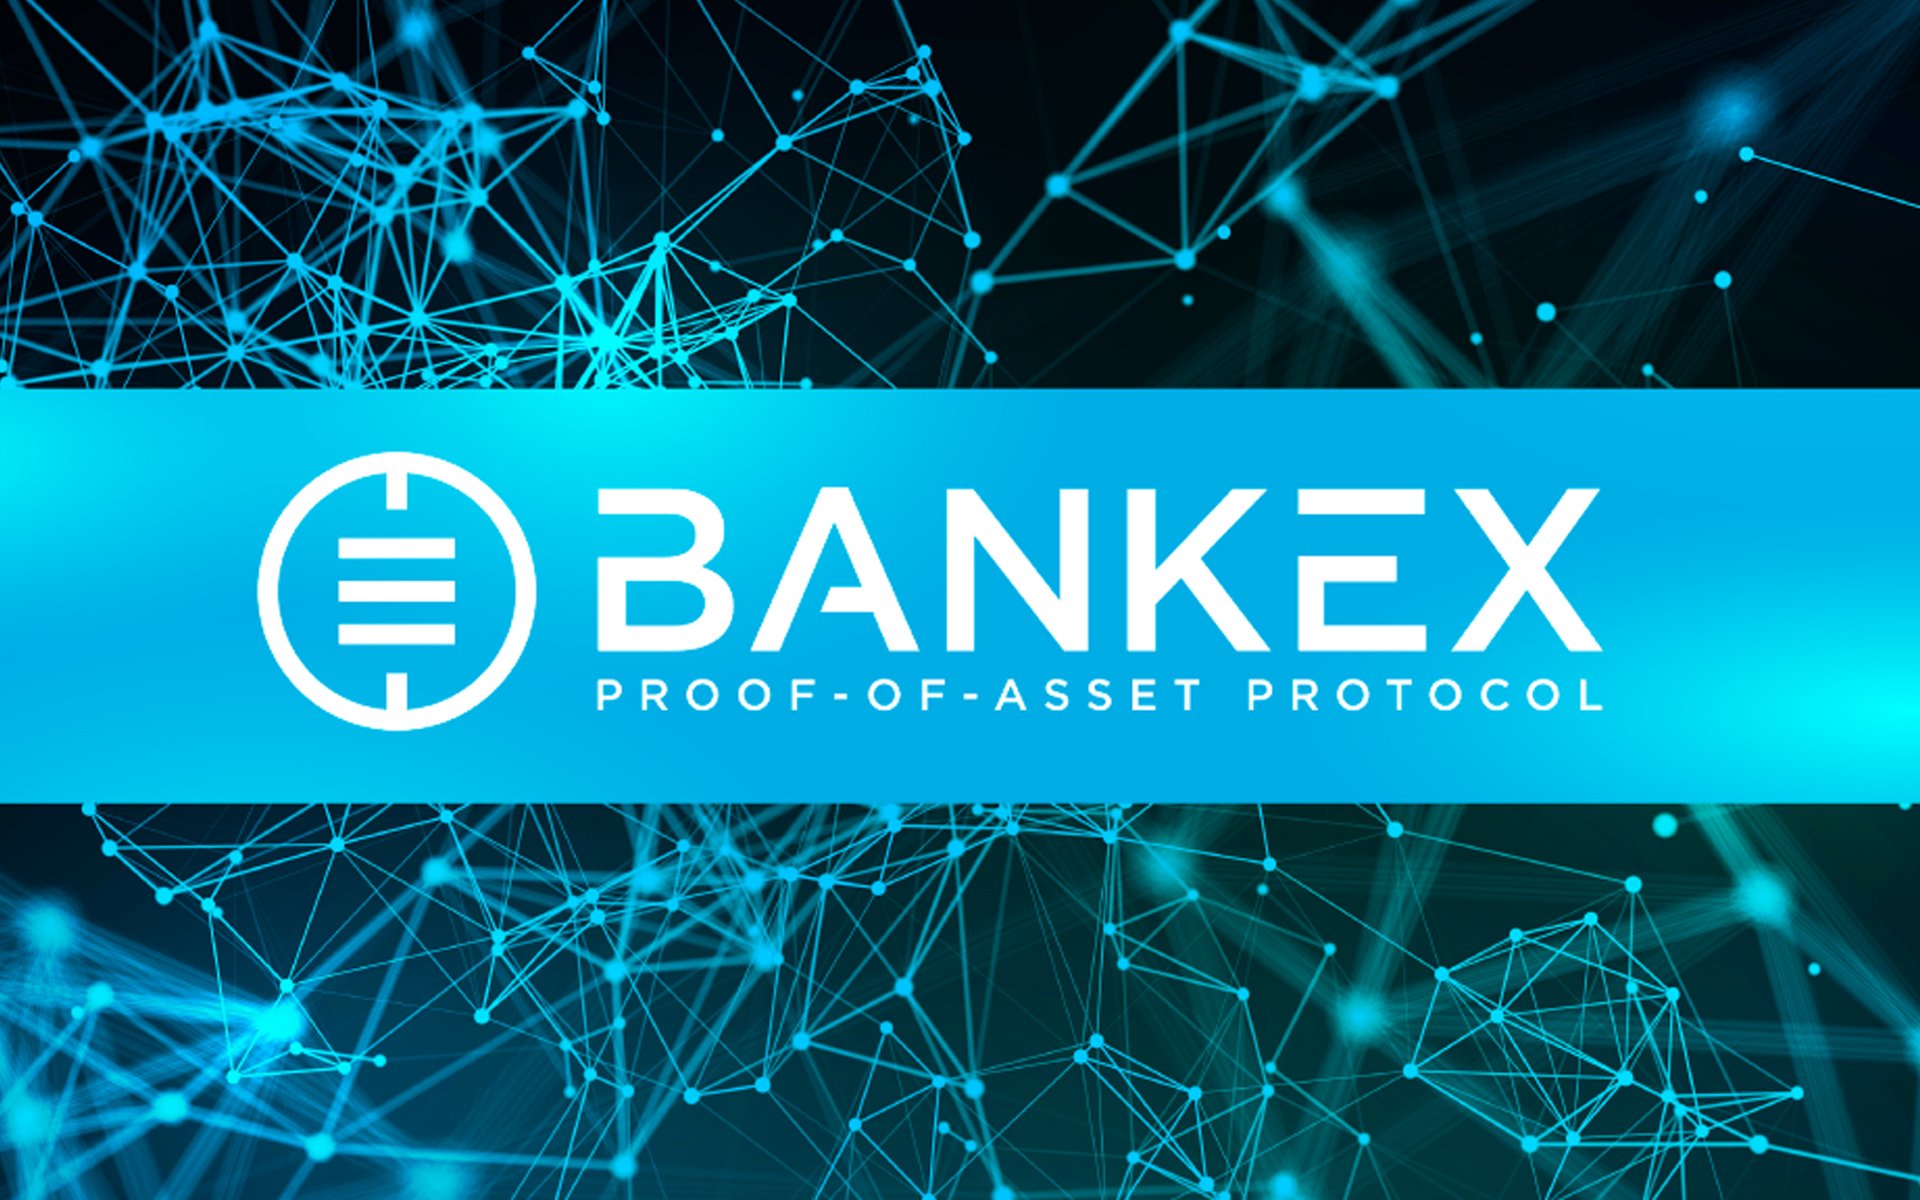 The BANKEX Token Sale Comes to an End with the Company Earning Its Place in the Top - 20 of the Most Successful Token Sales of All Time